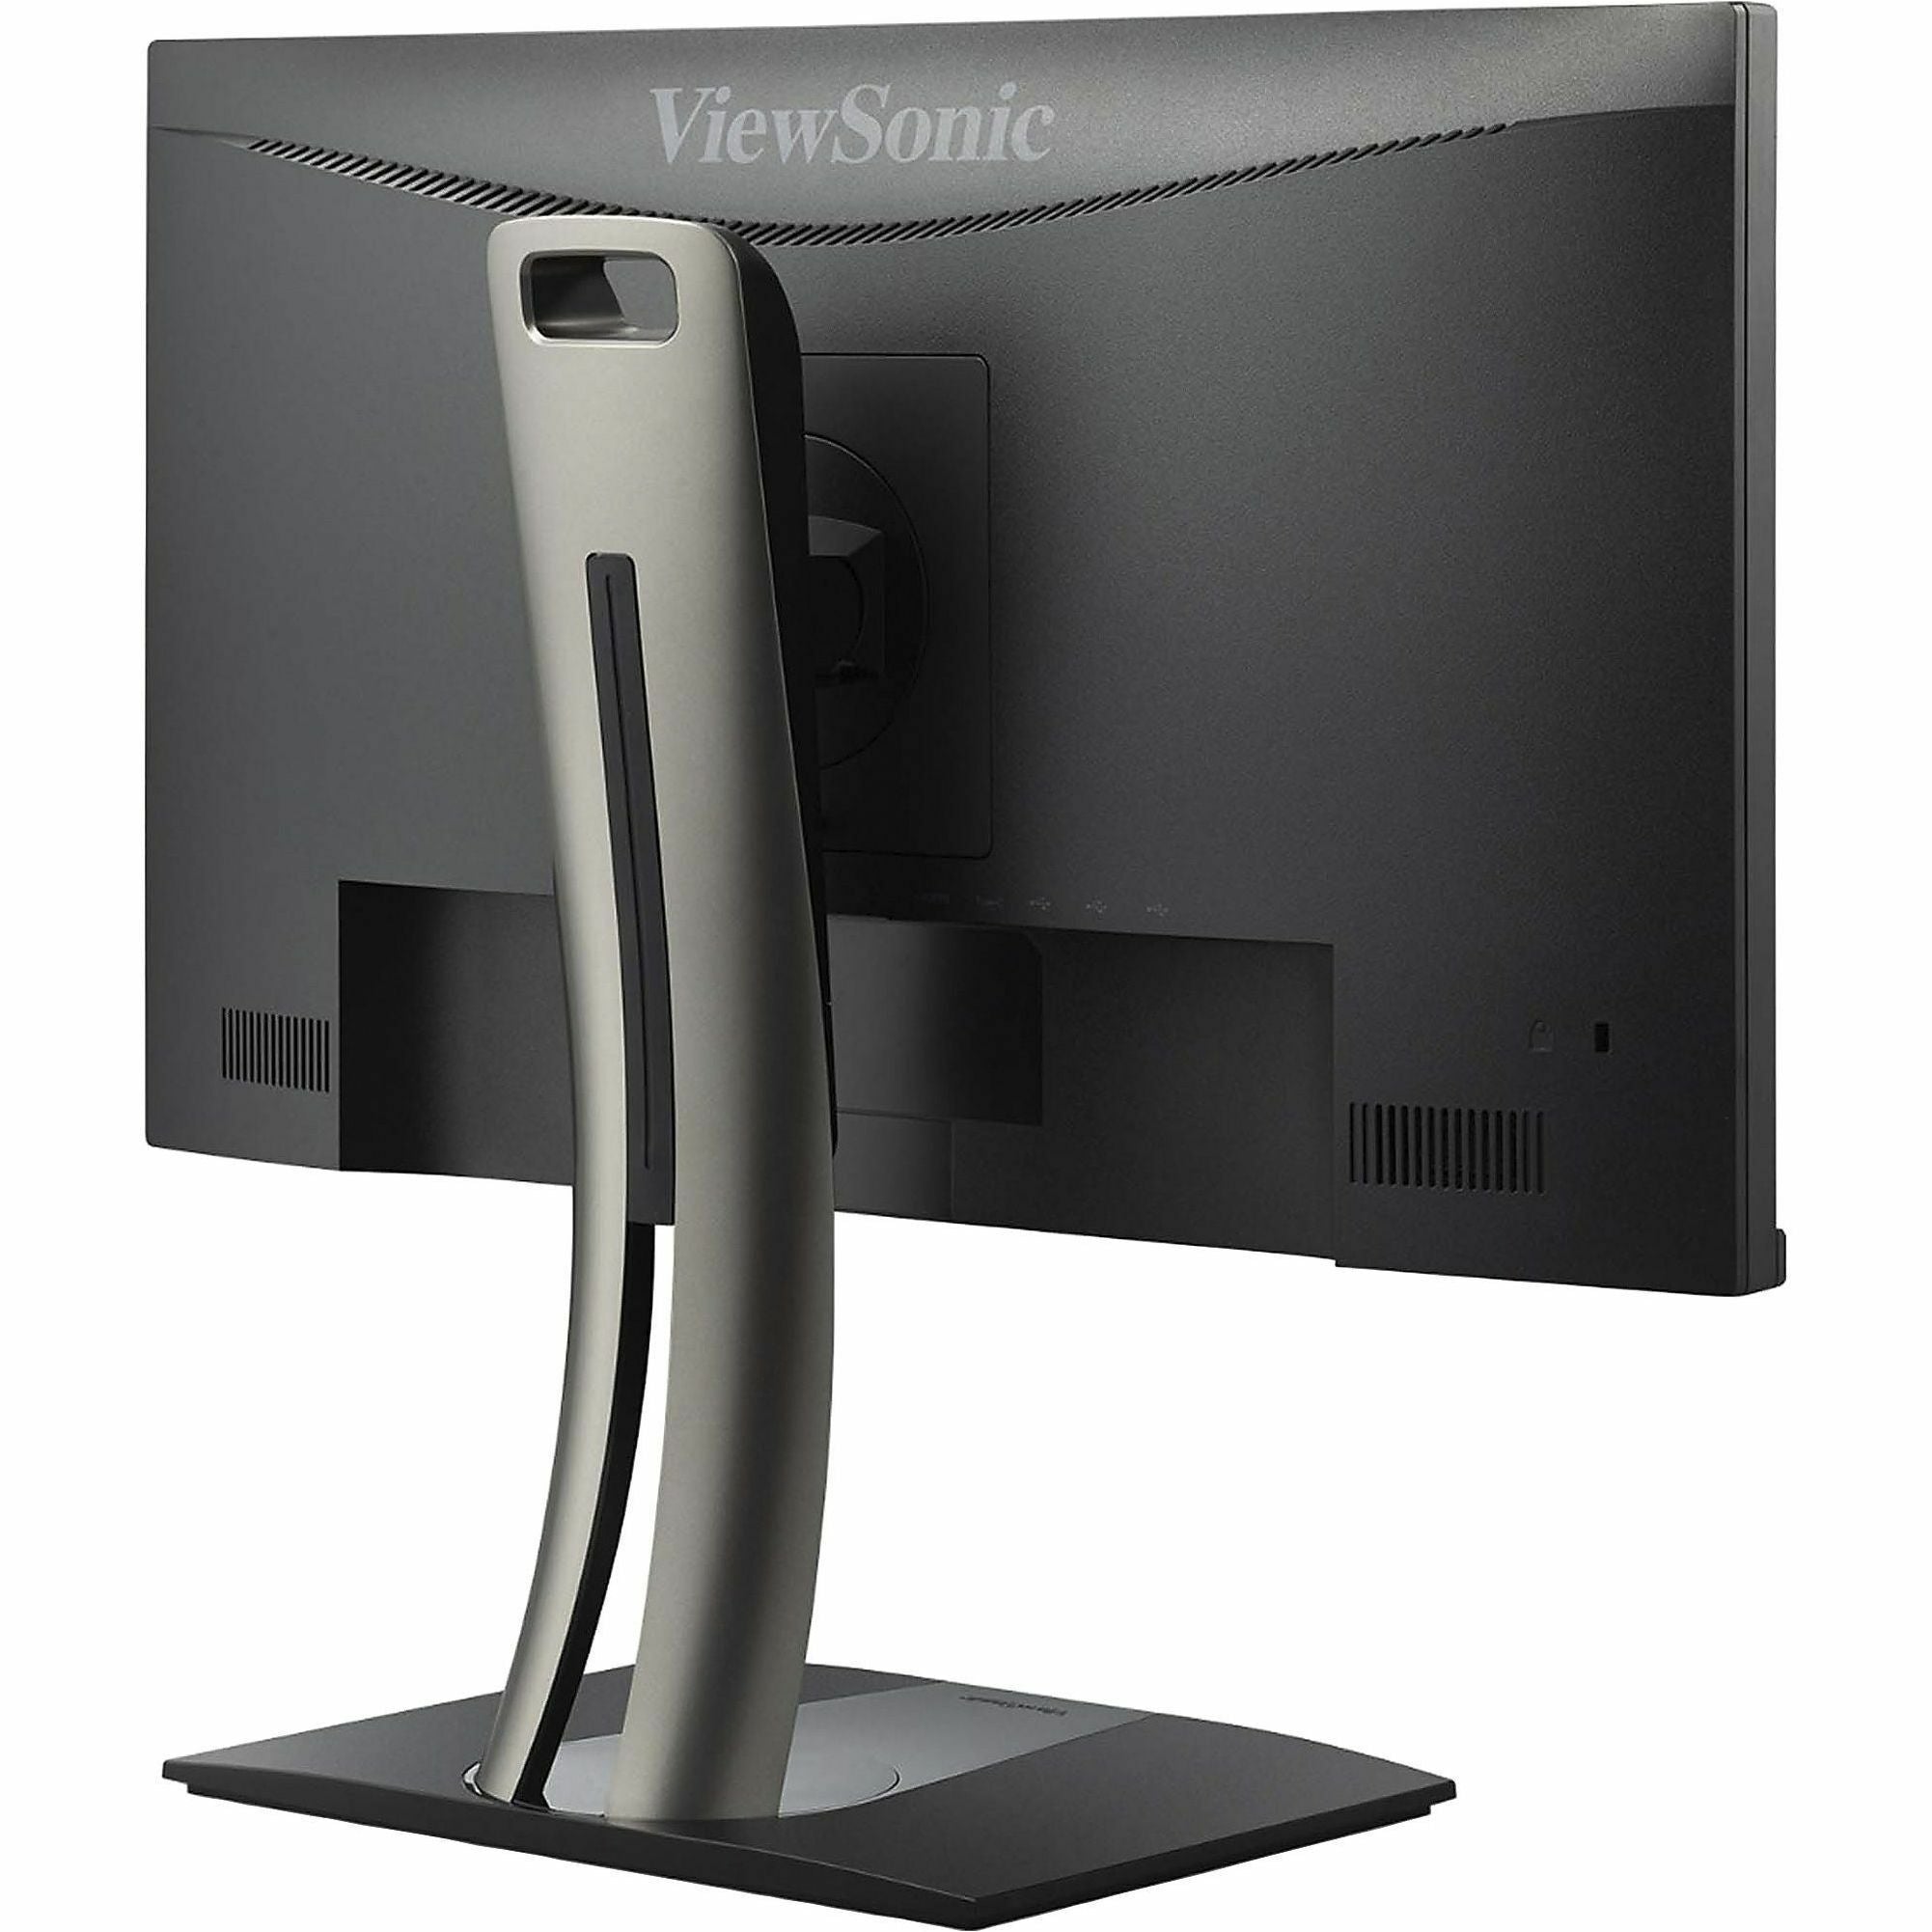 viewsonic-vp2456-24-inch-1080p-premium-ips-monitor-with-ultra-thin-bezels-color-accuracy-pantone-validated-hdmi-displayport-and-usb-c-for-professional-home-and-office-colorpro-vp2456-1080p-ergonomic-ips-monitor-with-pantone-validated-usb-c_vewvp2456 - 2